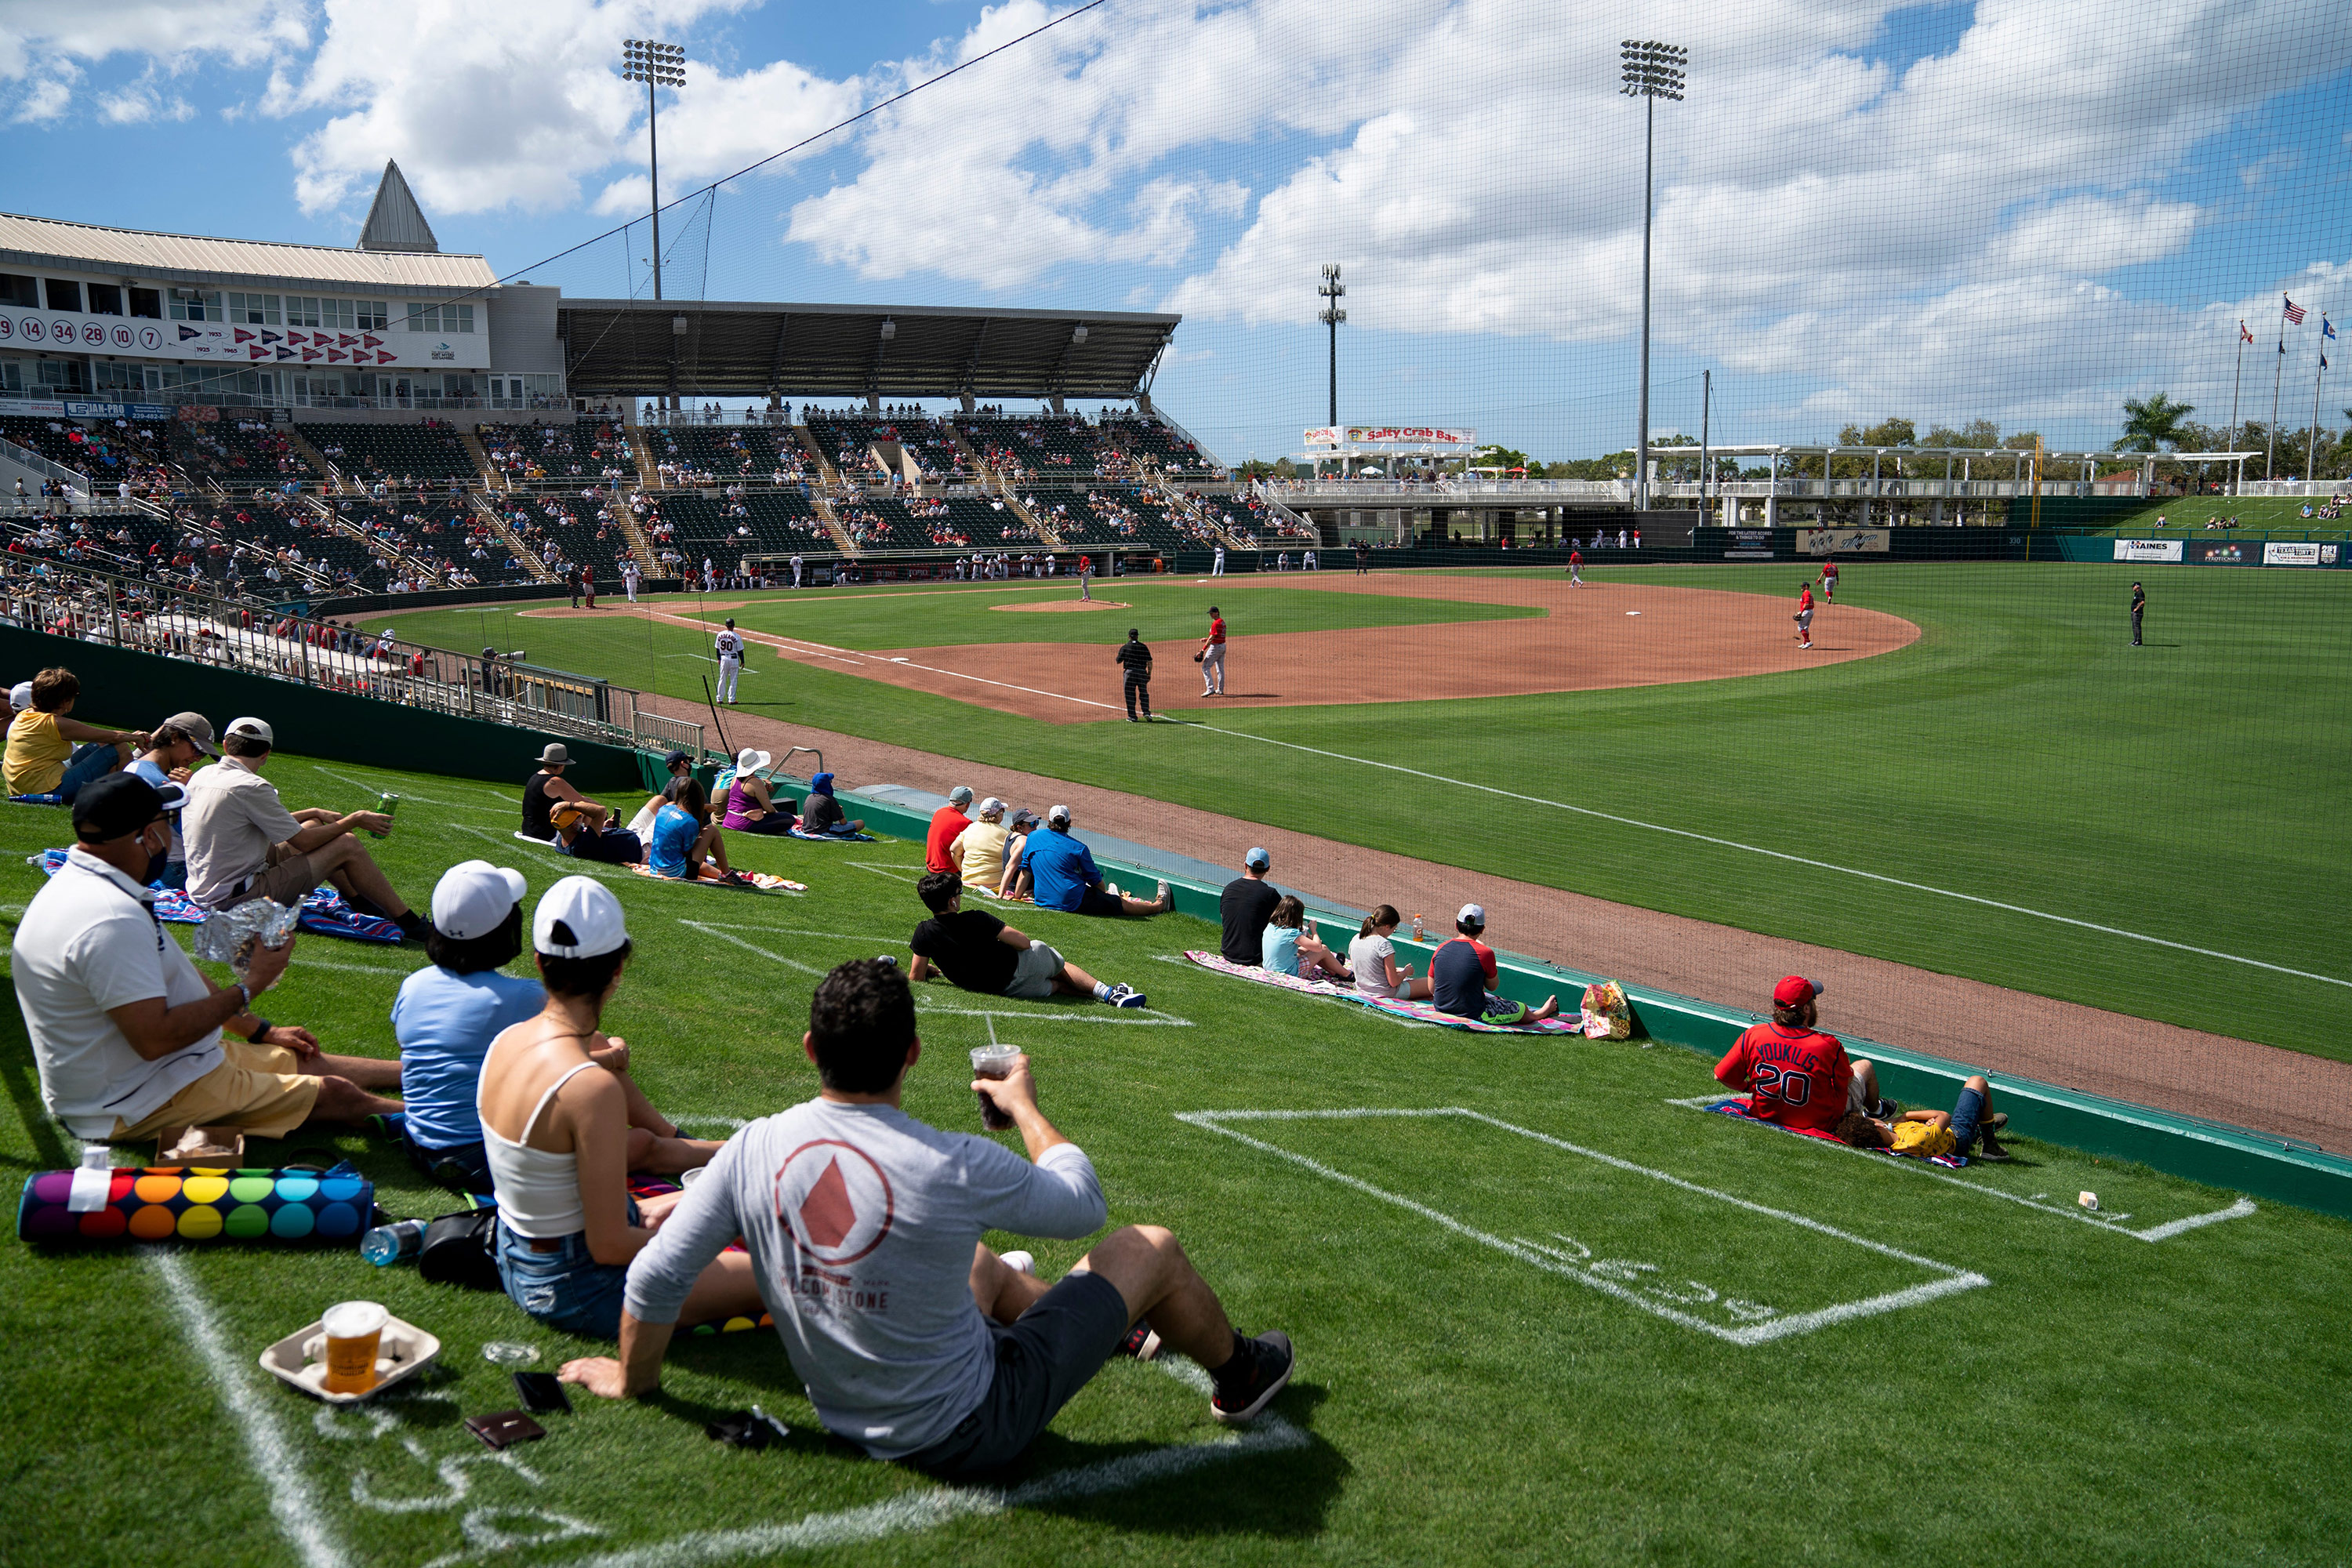 Fans sit in designated rectangles to encourage social distancing during the first spring training game between the Minnesota Twins and Boston Red Sox in Fort Myers, Florida, on February 28.